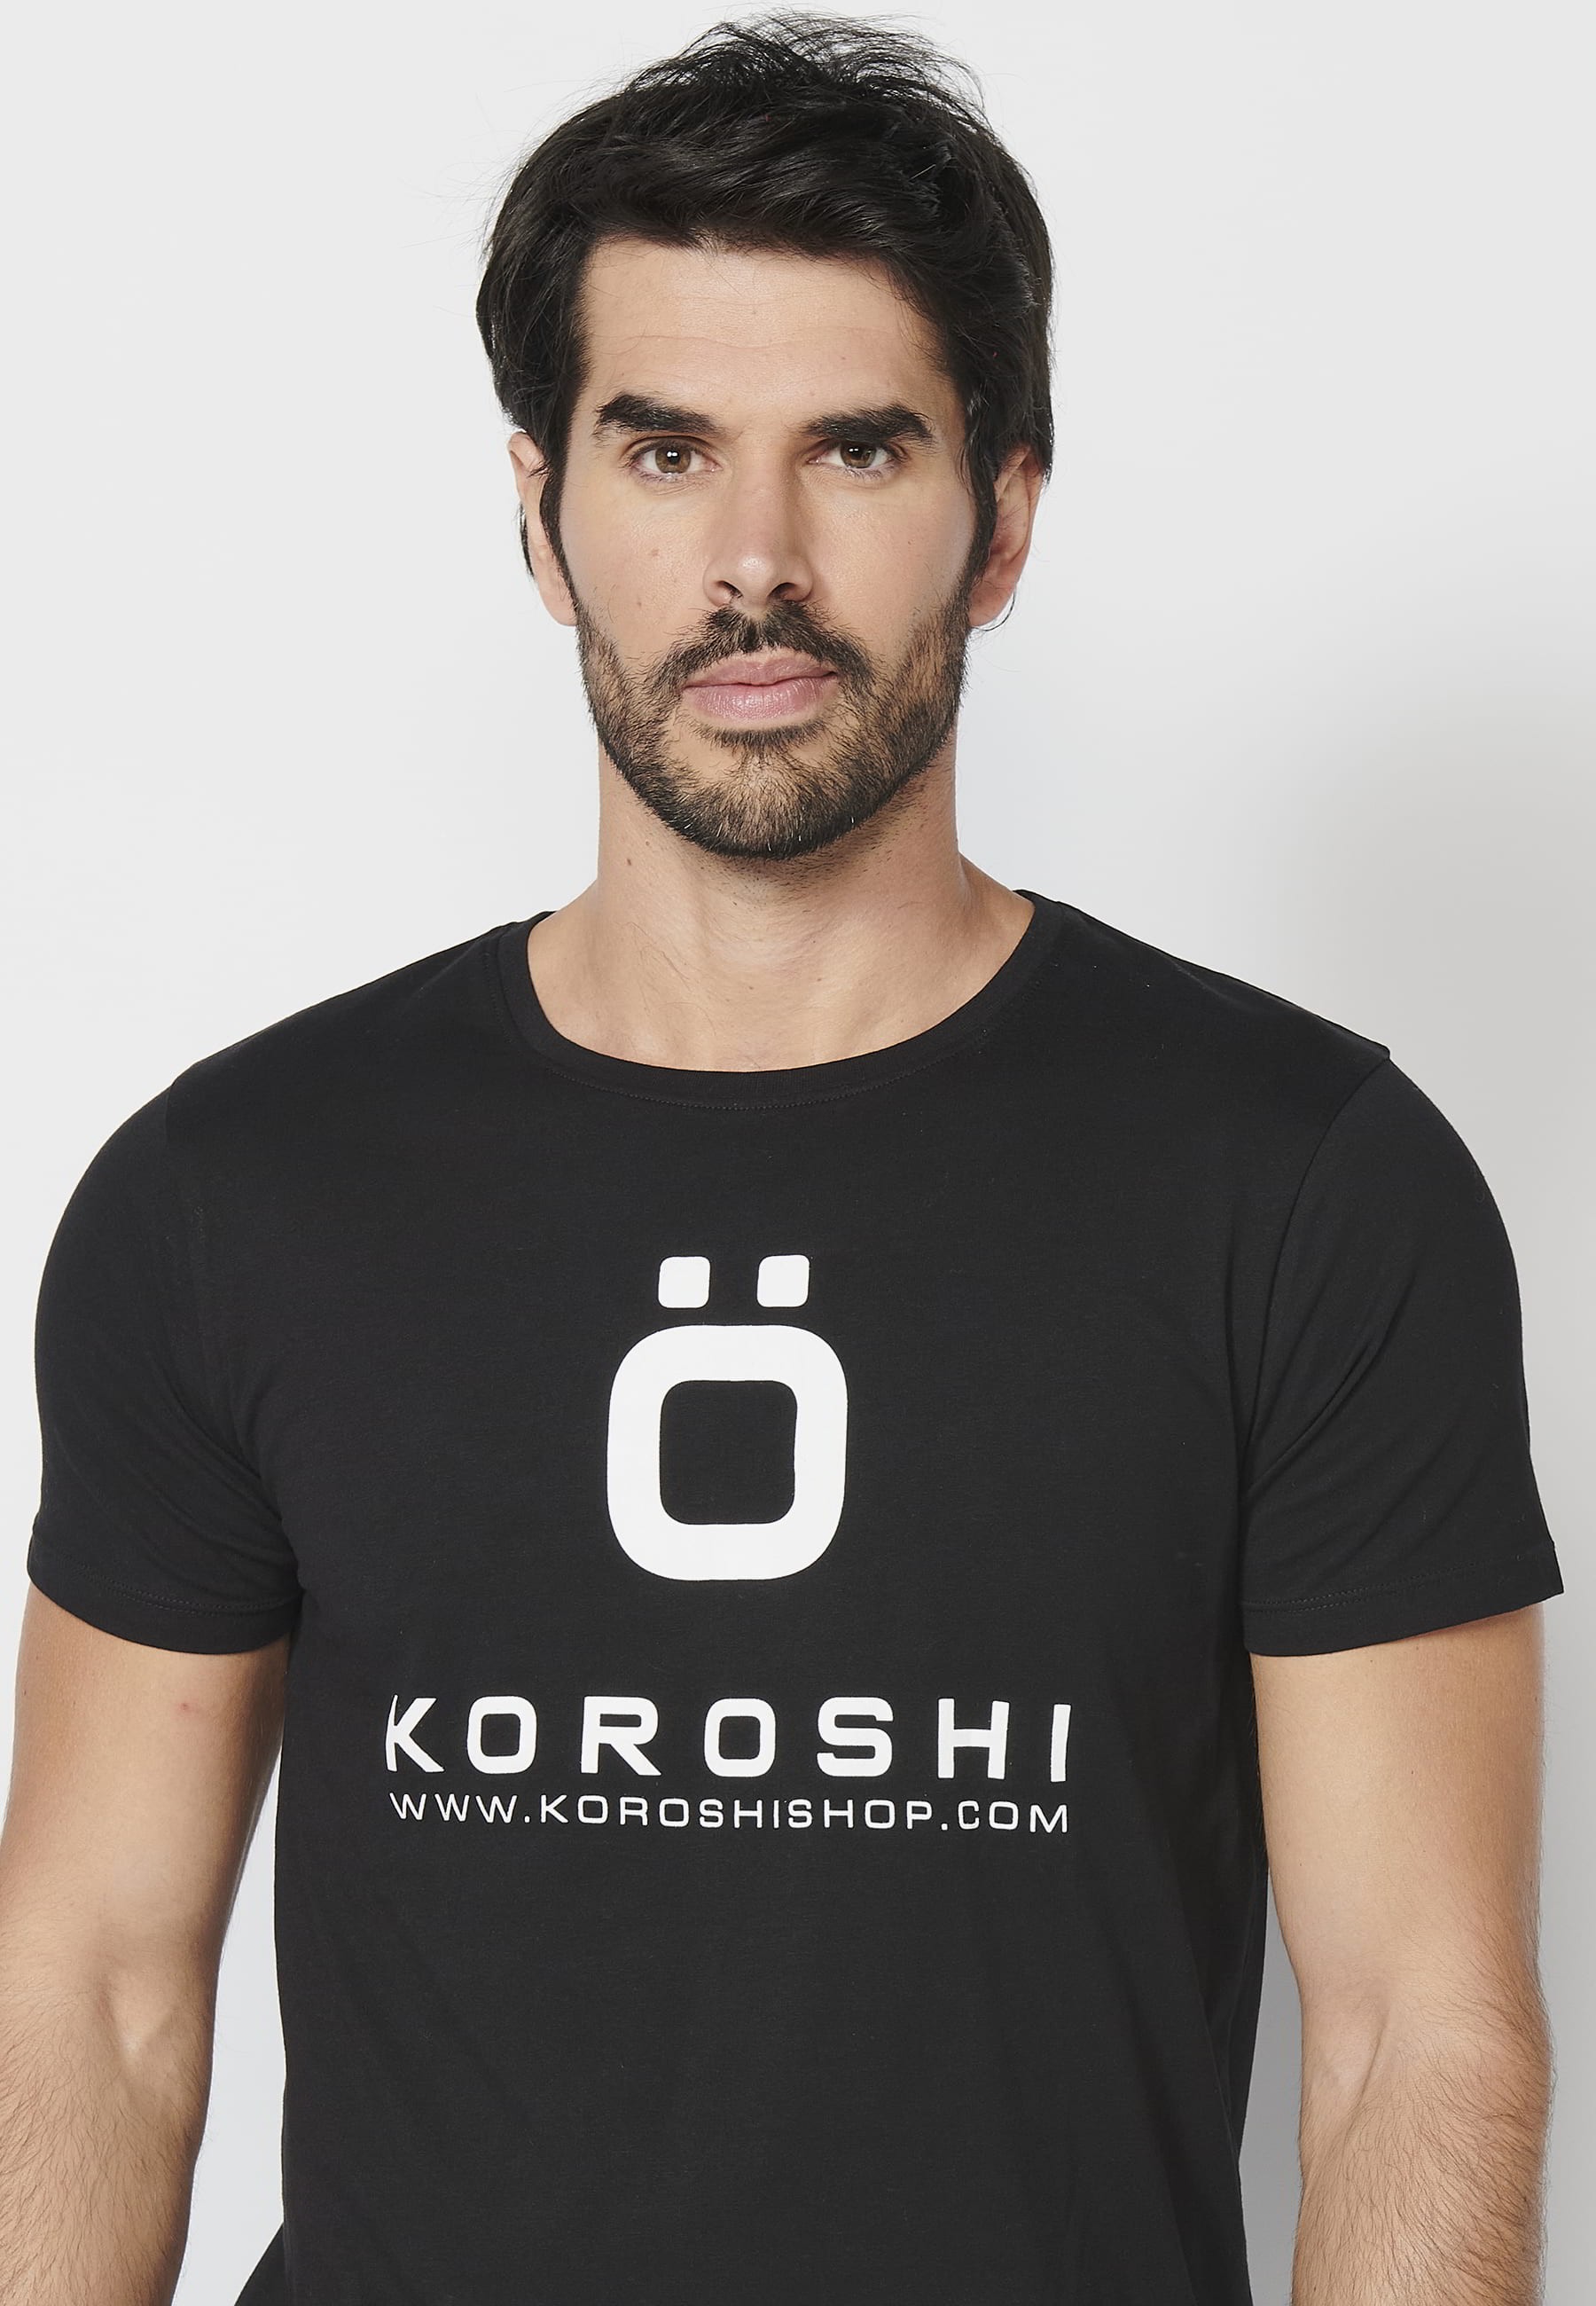 Short-sleeved Cotton T-shirt with front logo in Black color for Men